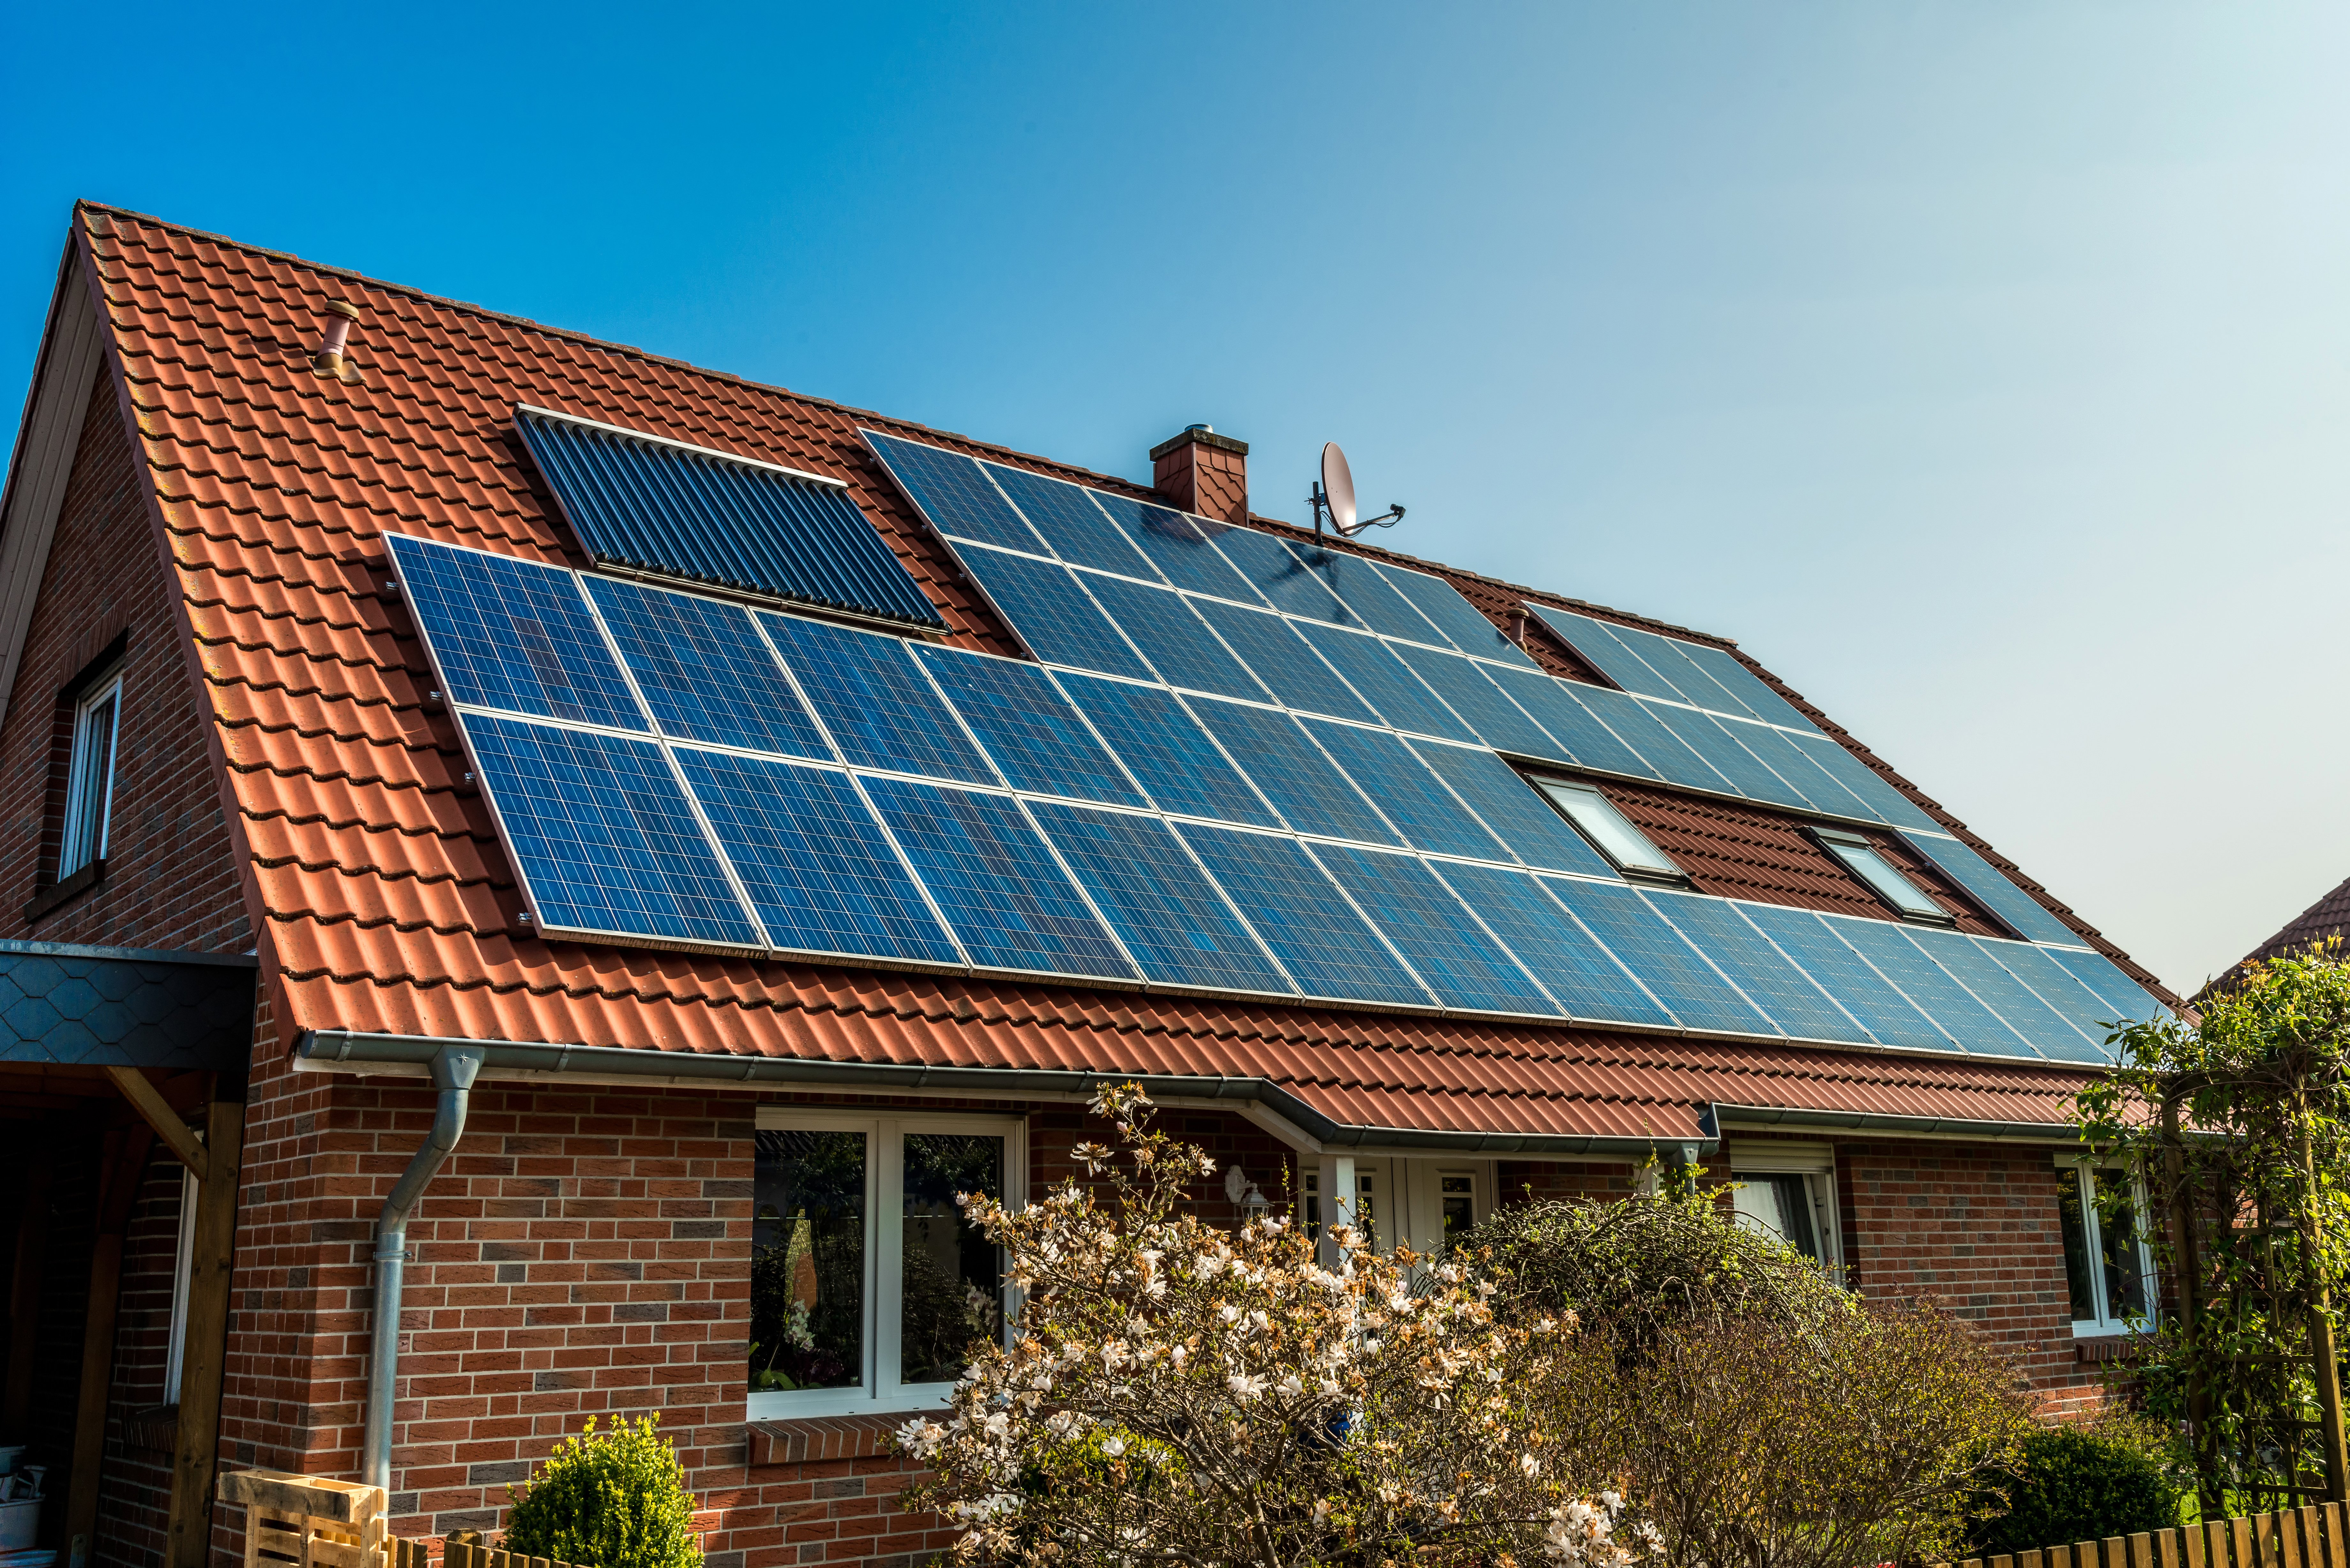 Green mortgages incentivise homeowners to reduce a property's carbon footprint